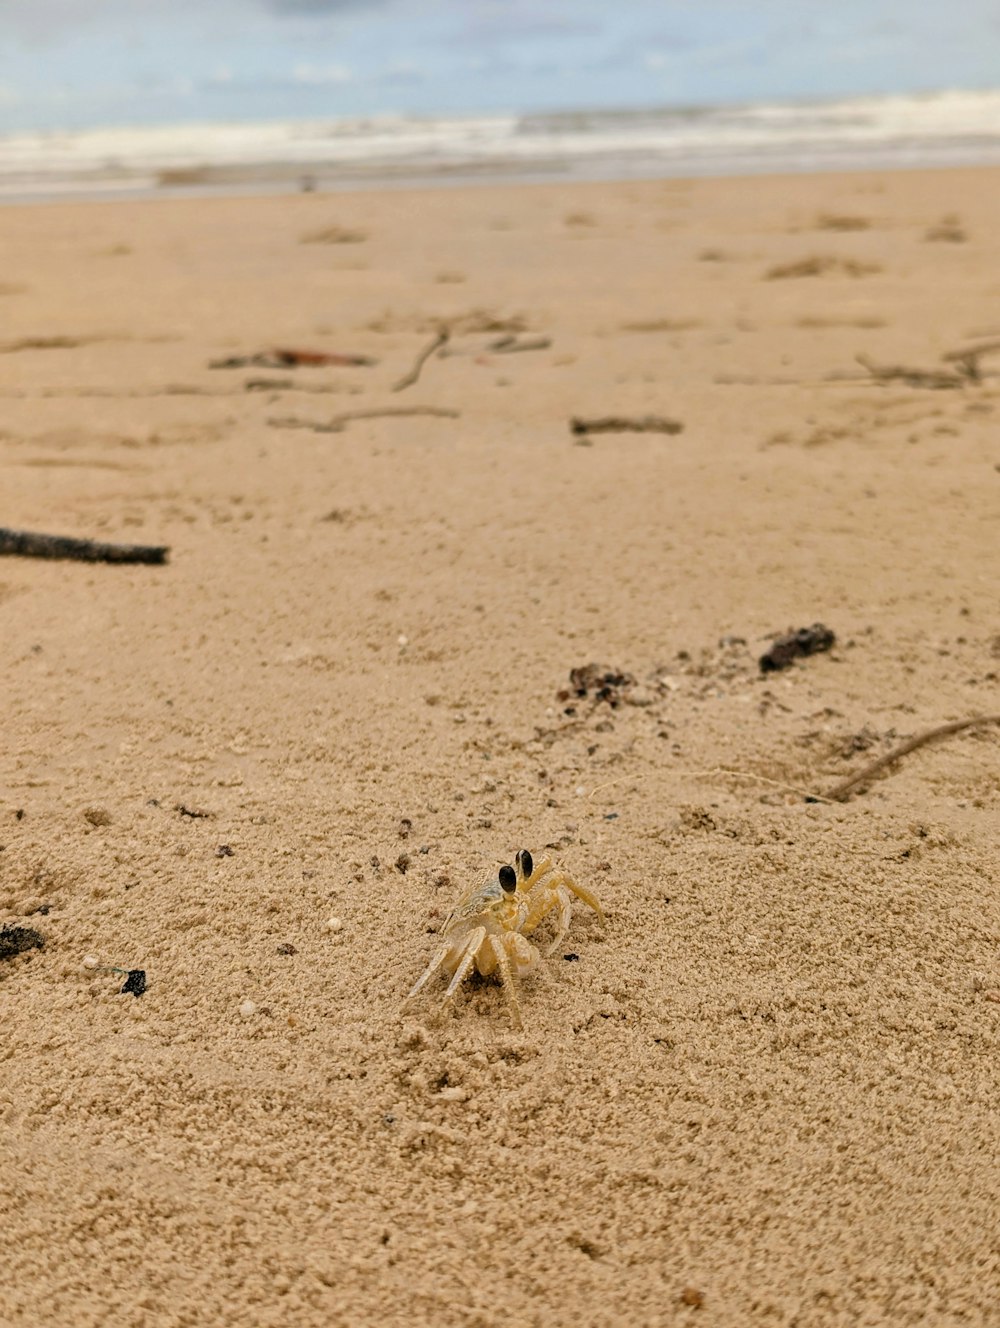 a spider crawling on the sand of a beach